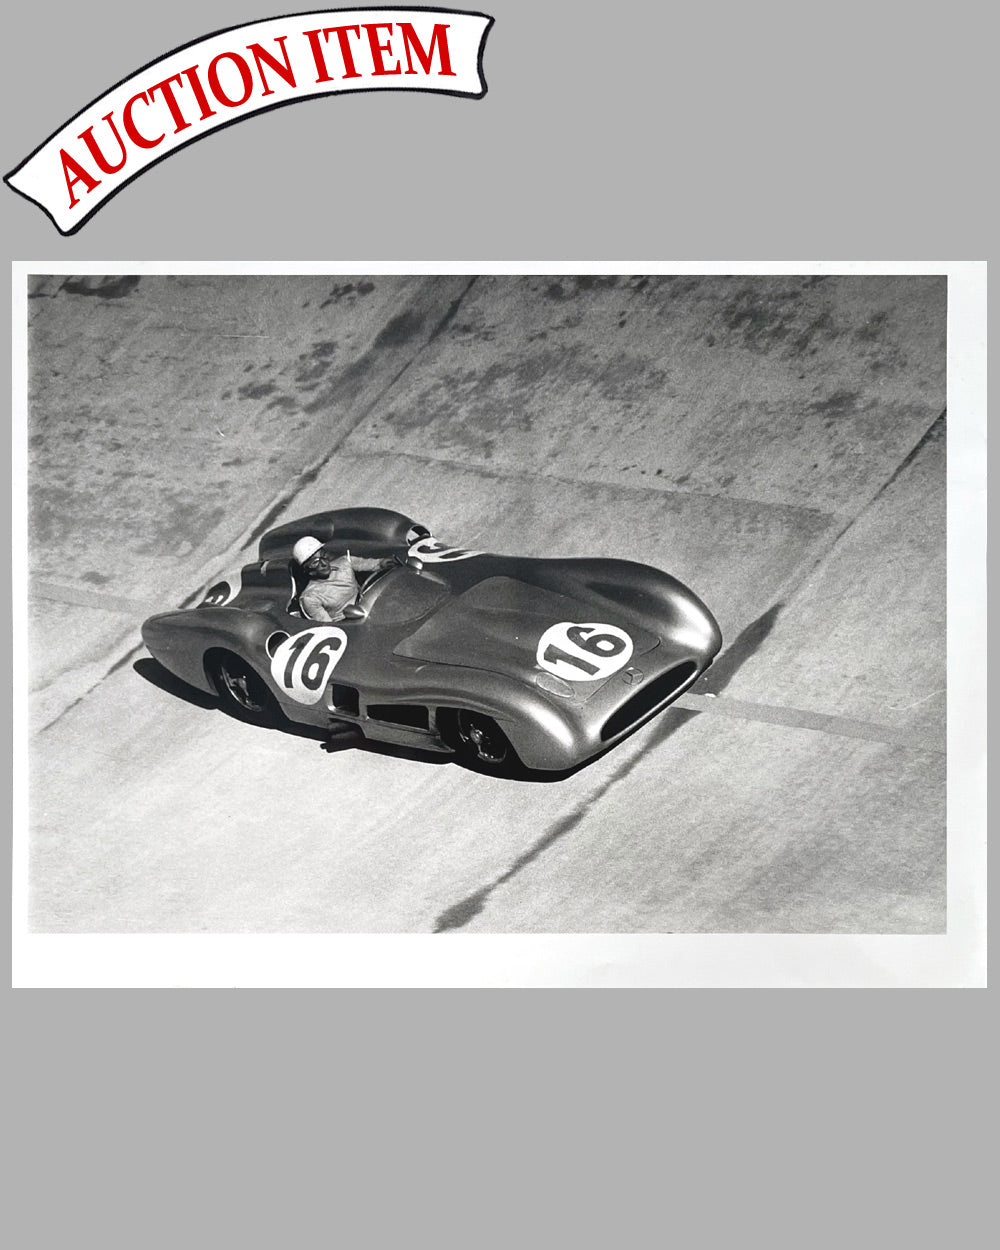 2 - Stirling Moss at speed 1955 b&w photograph